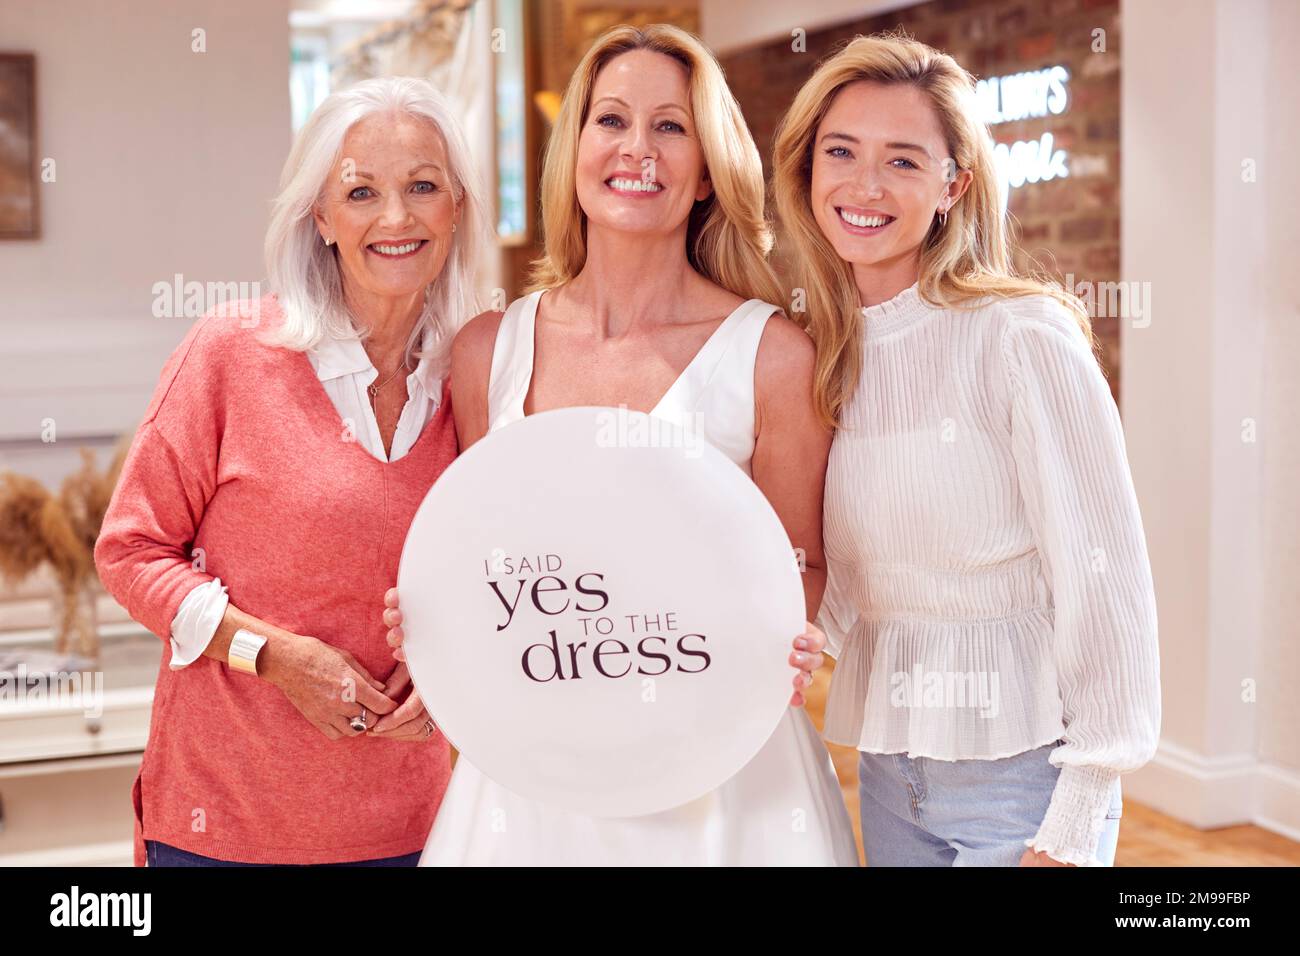 Grandmother With Adult Daughter And Granddaughter In Bridal Store Holding 'Yes To The Dress' Sign Stock Photo